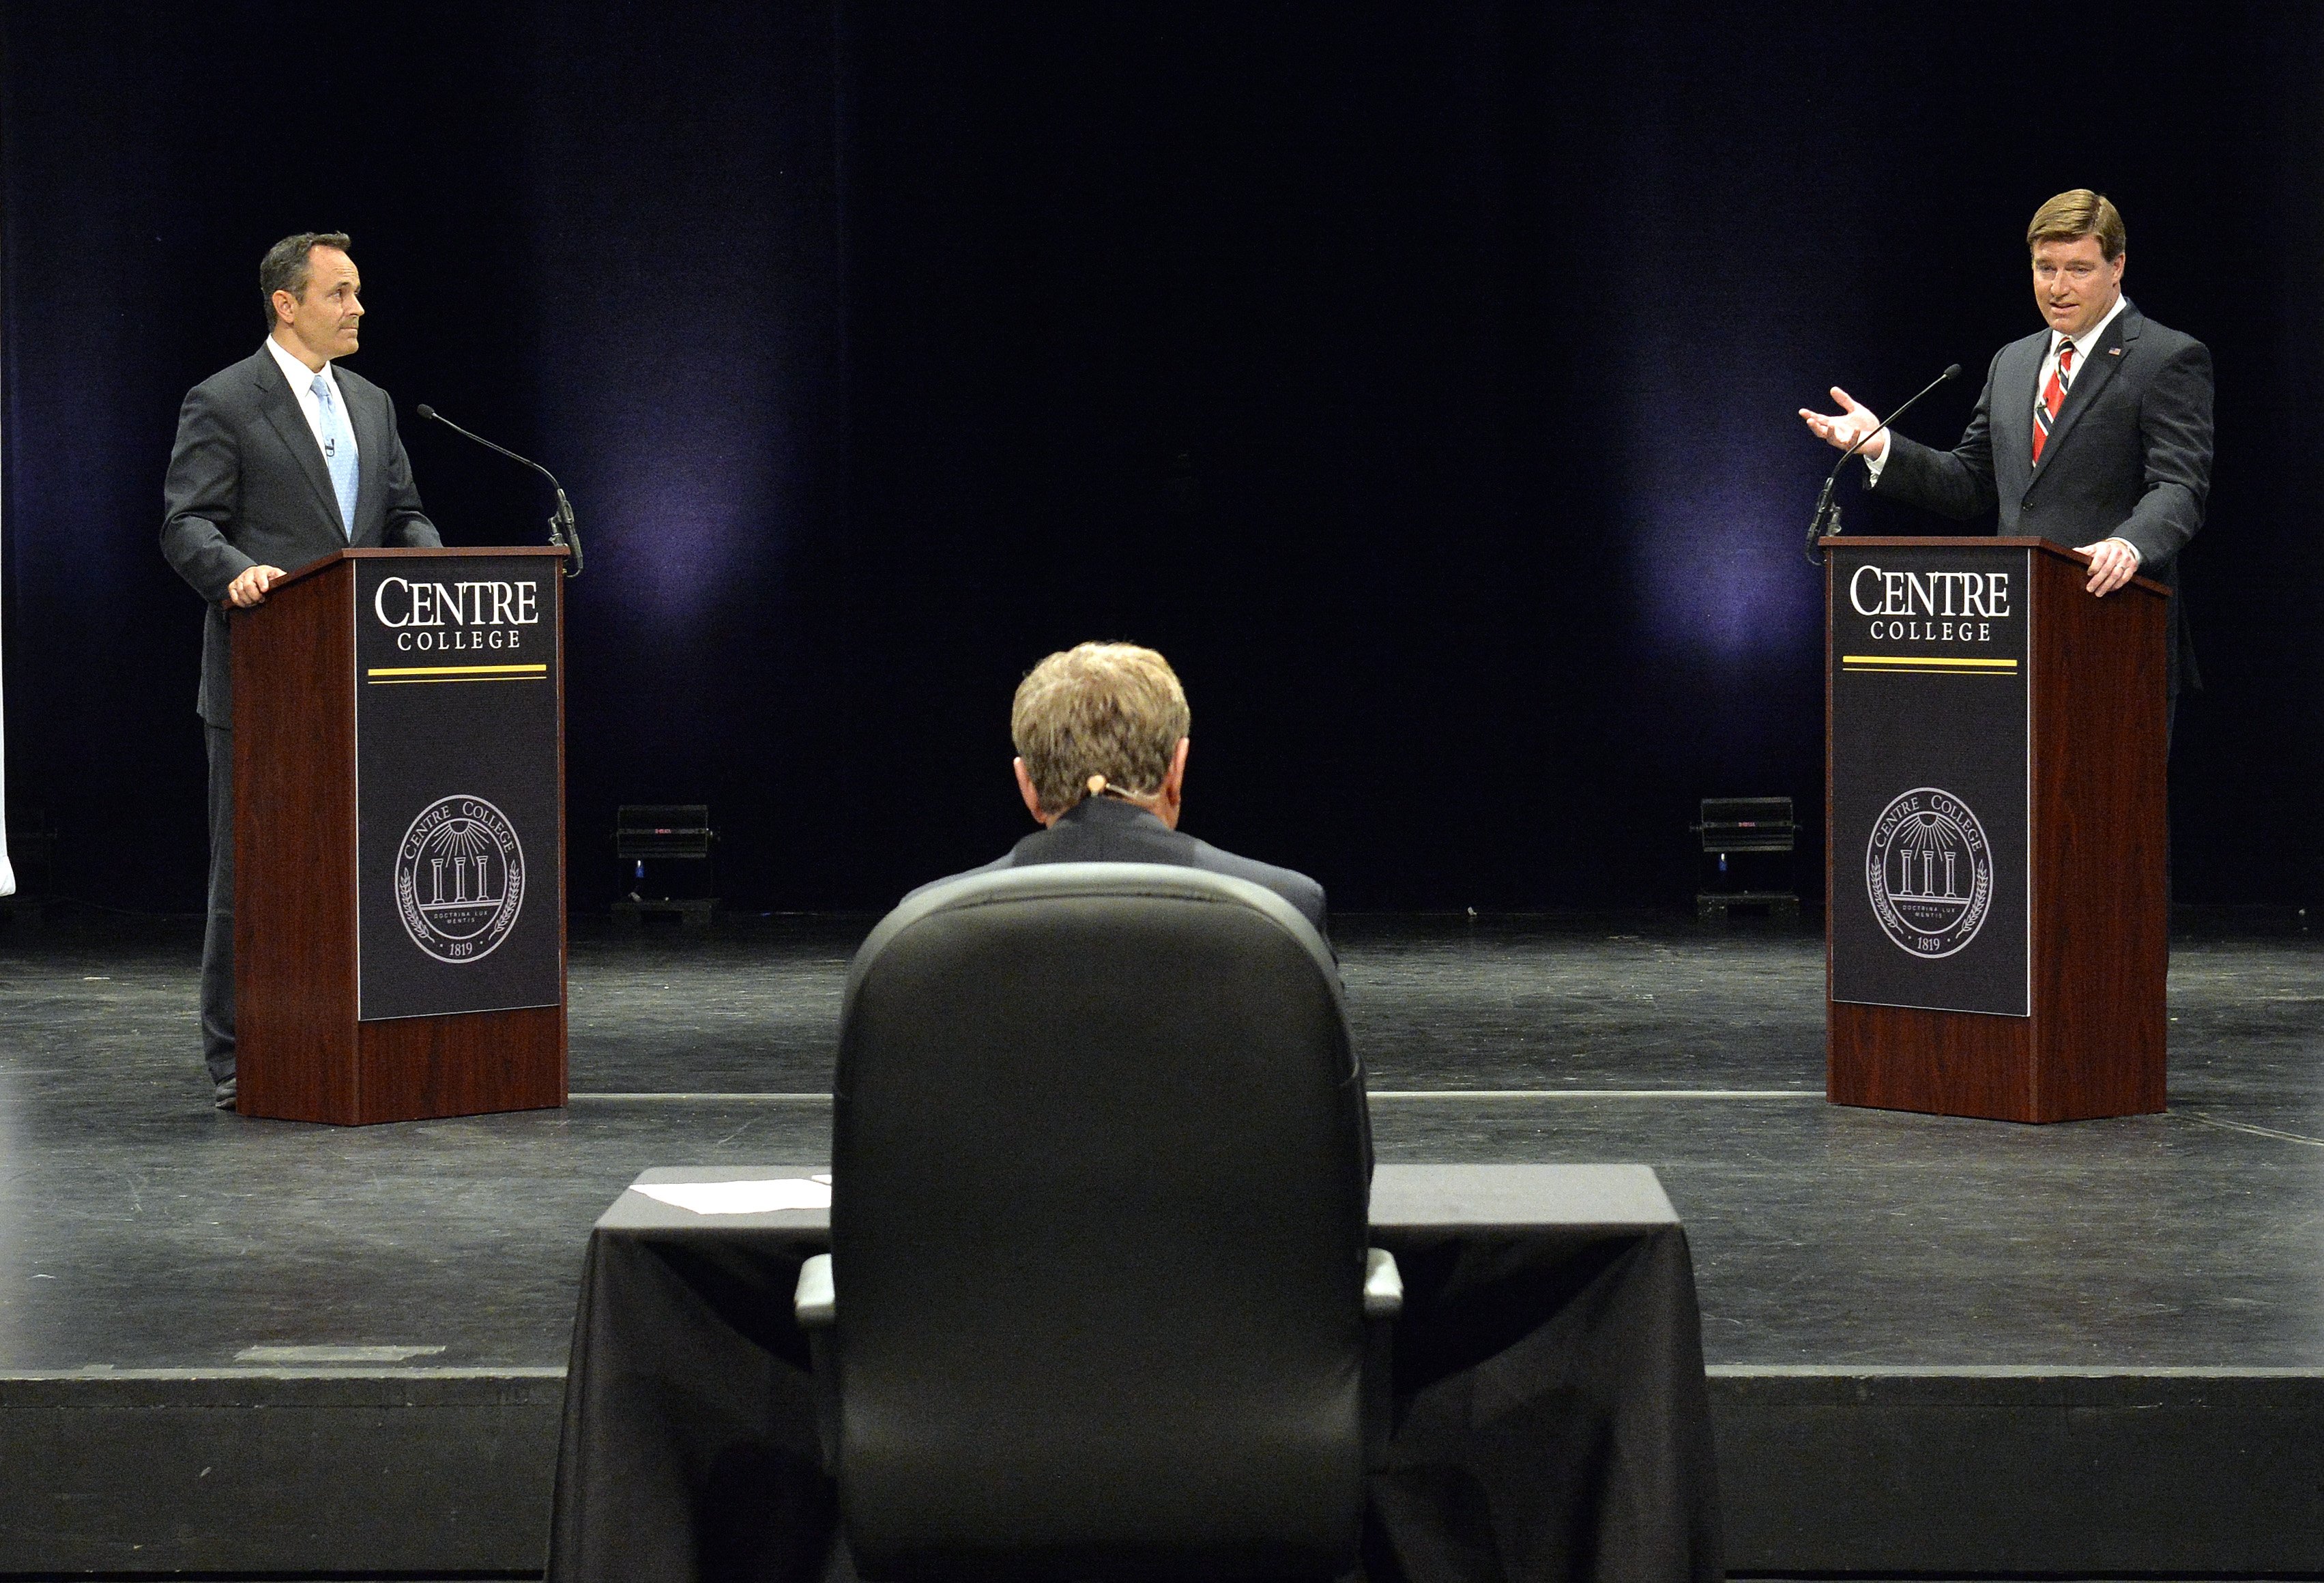 Kentucky Democratic gubernatorial candidate Jack Conway, right, responds to a question from the moderator, as his opponent, Republican Matt Bevin Looks on during the 2015 Kentucky Gubernatorial Debate hosted by Centre College on Oct. 6, 2015, in Danville, Ky.